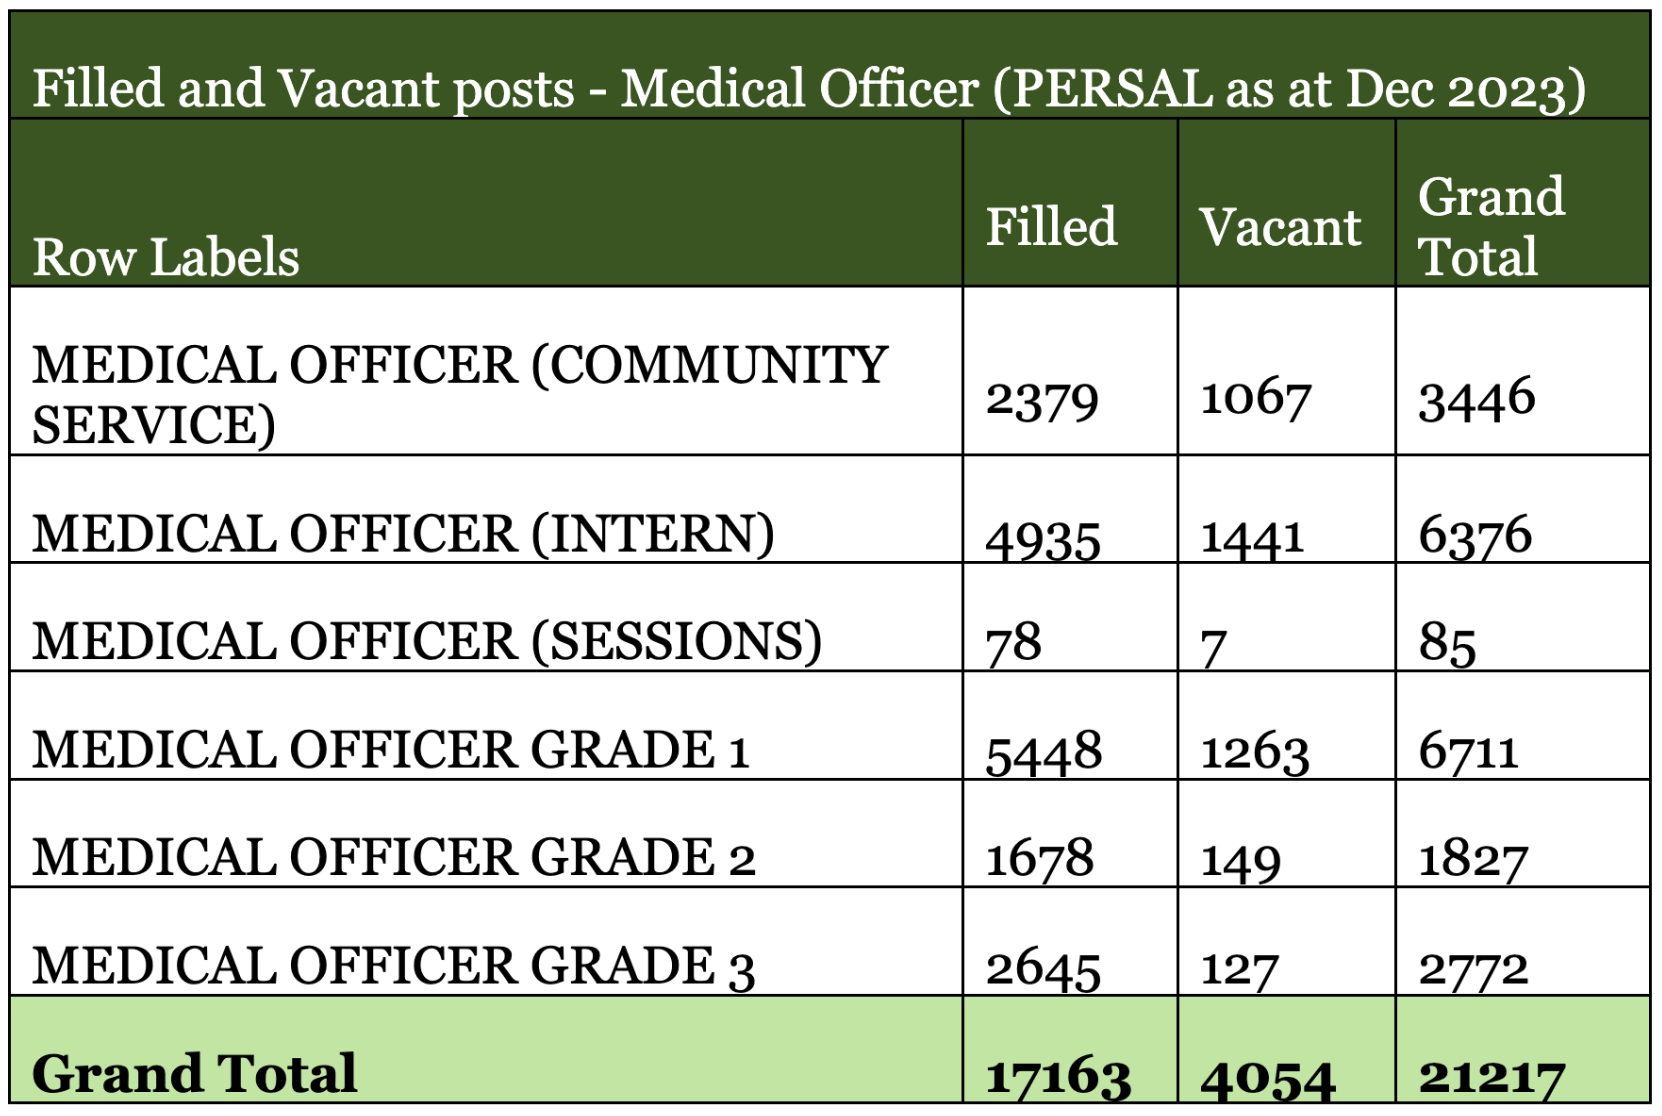 Filled and vacant posts data